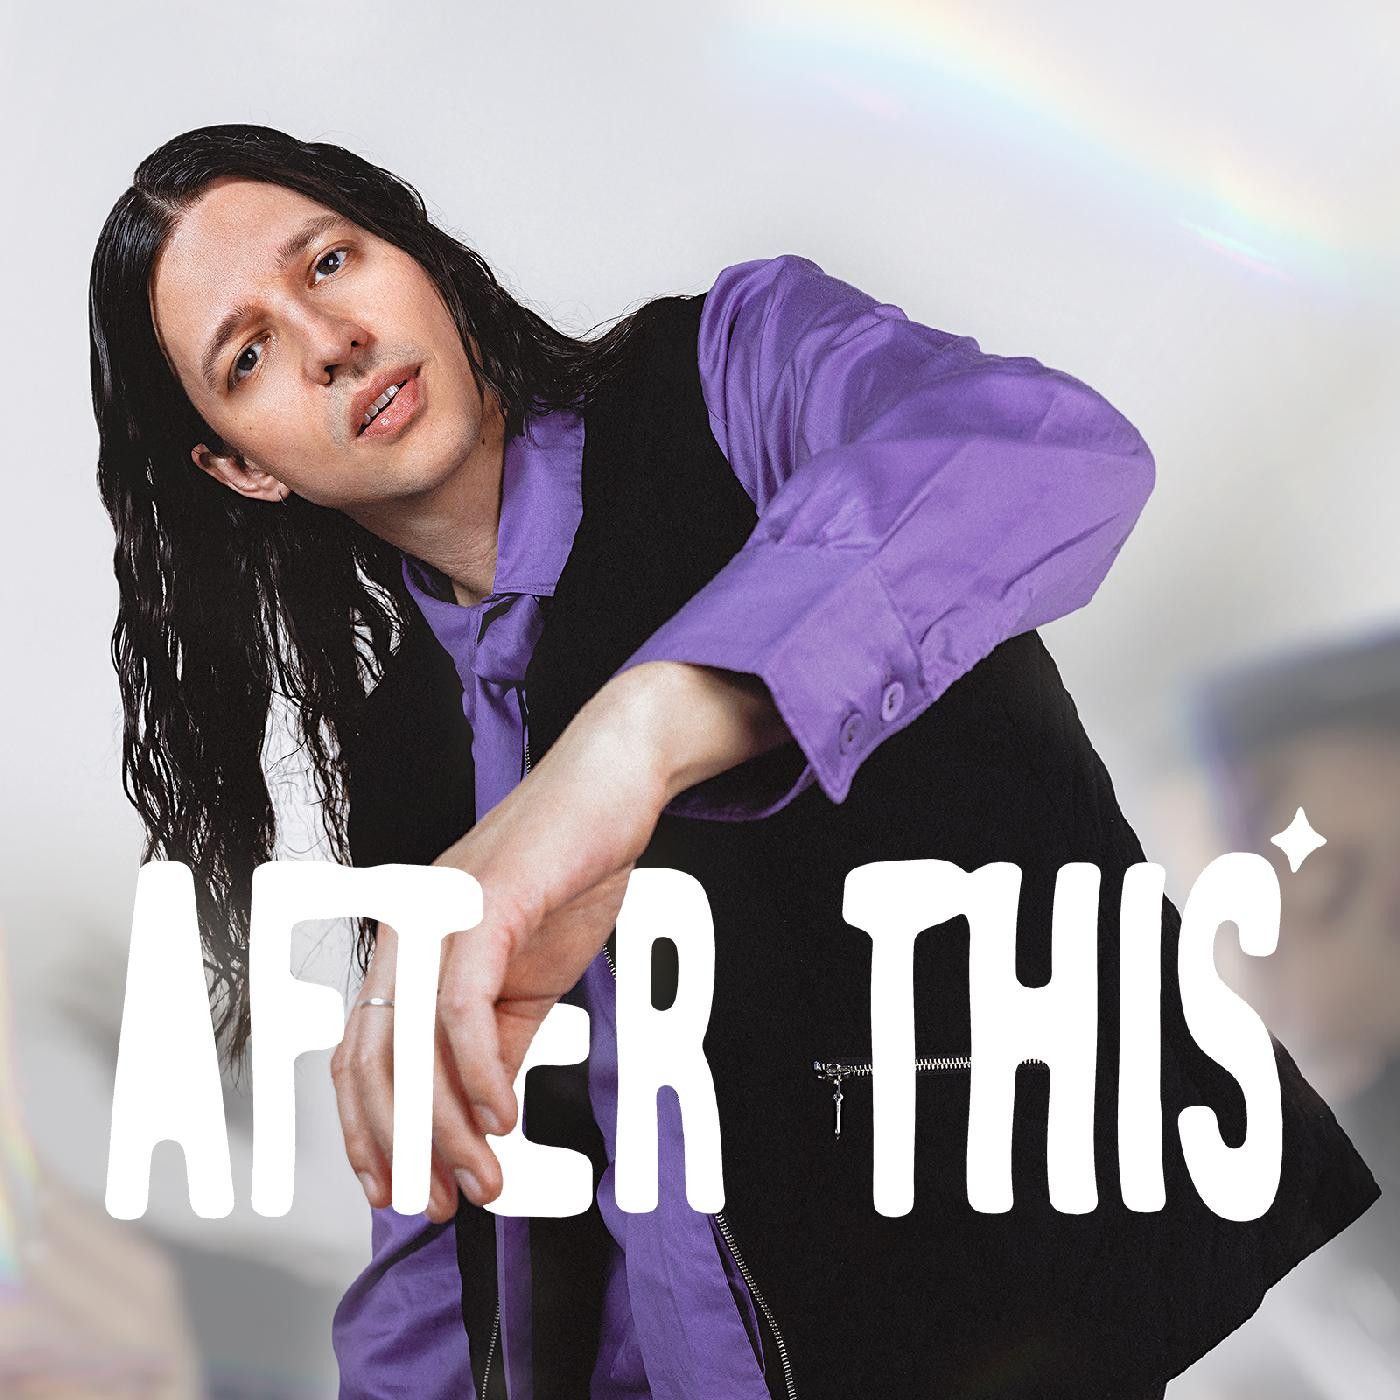 ADRIAN UNDERHILLL / エイドリアン・アンダーヒル / AFTER THIS (CD)